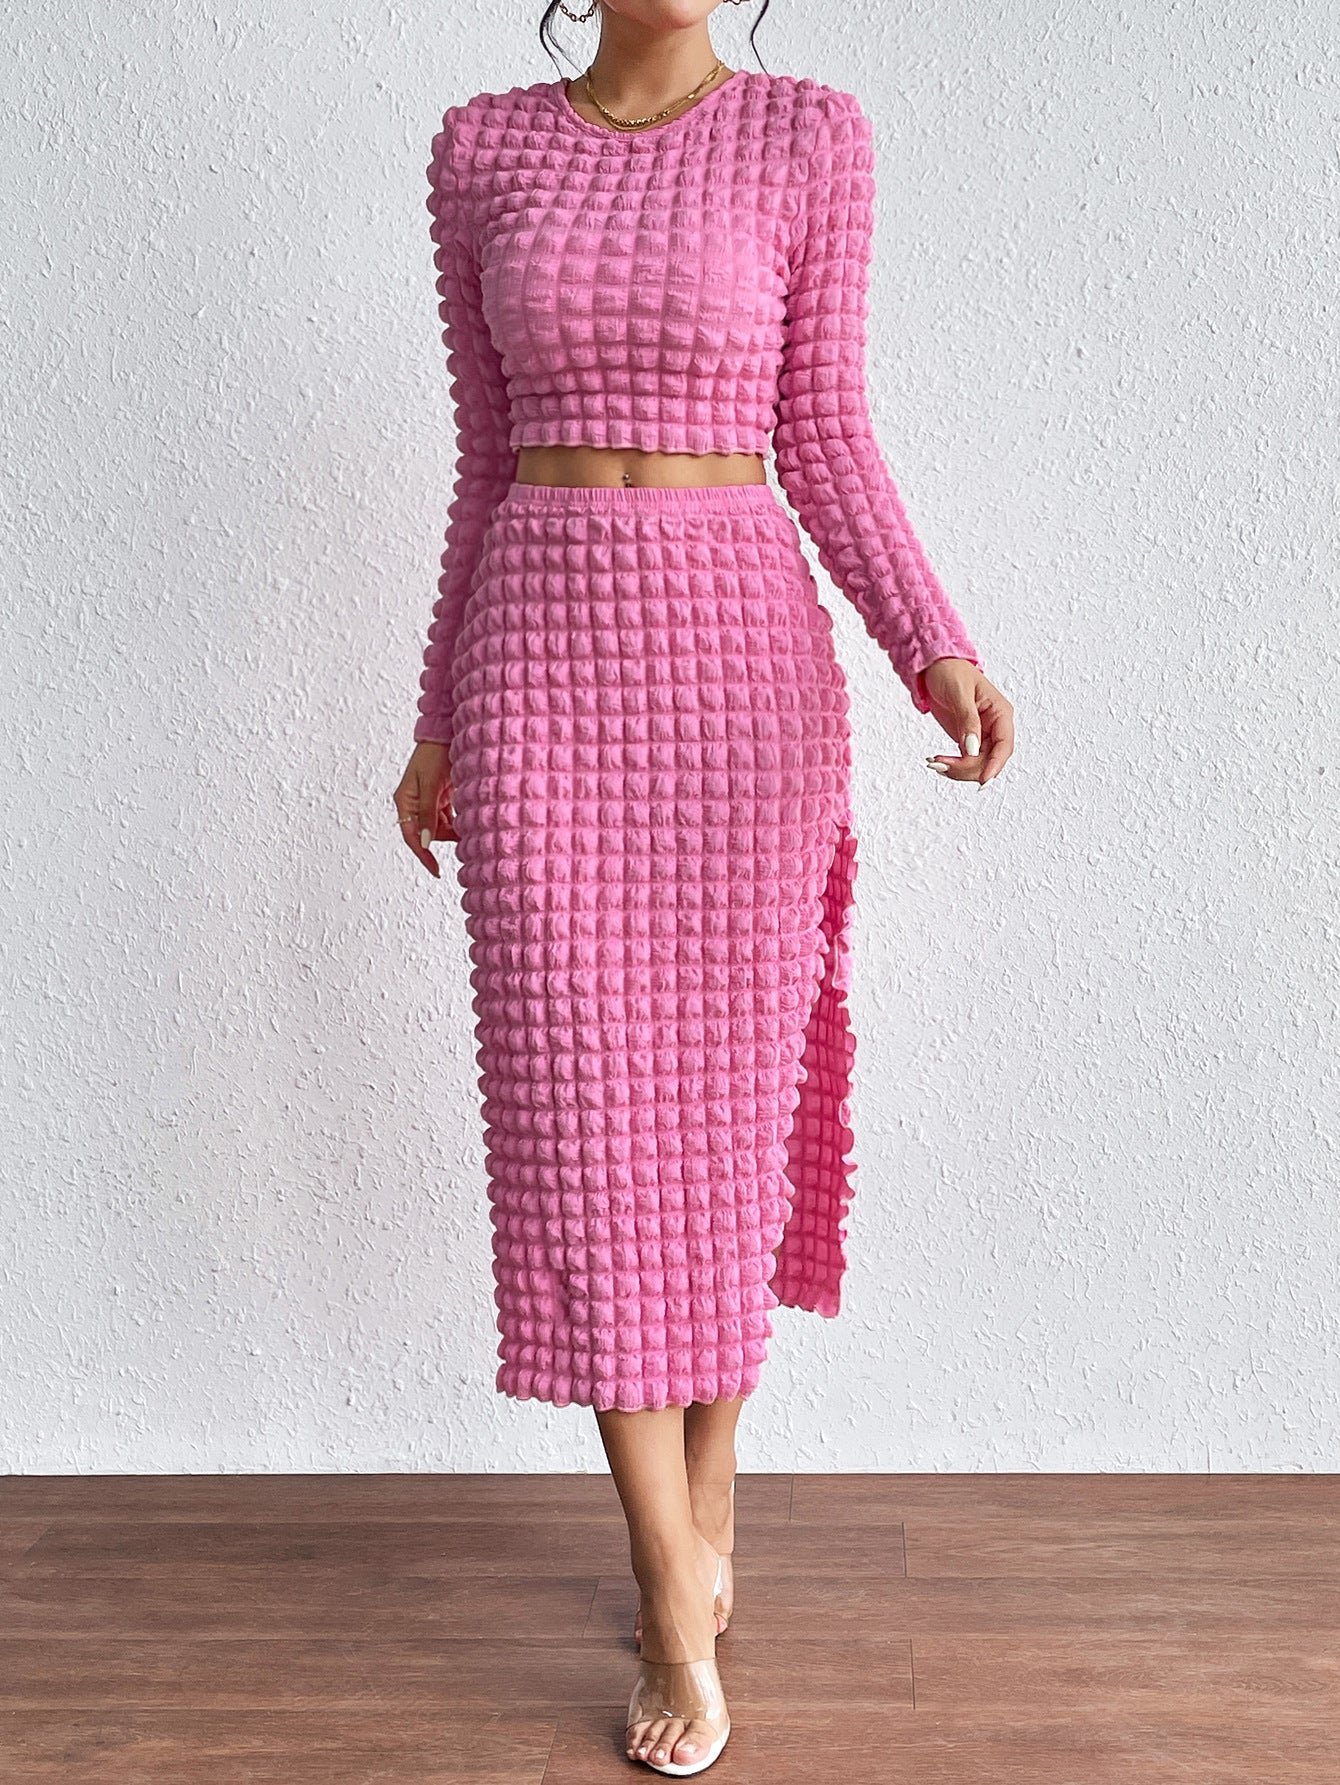 Pink Popcorn Skirt Set Cropped Outfit